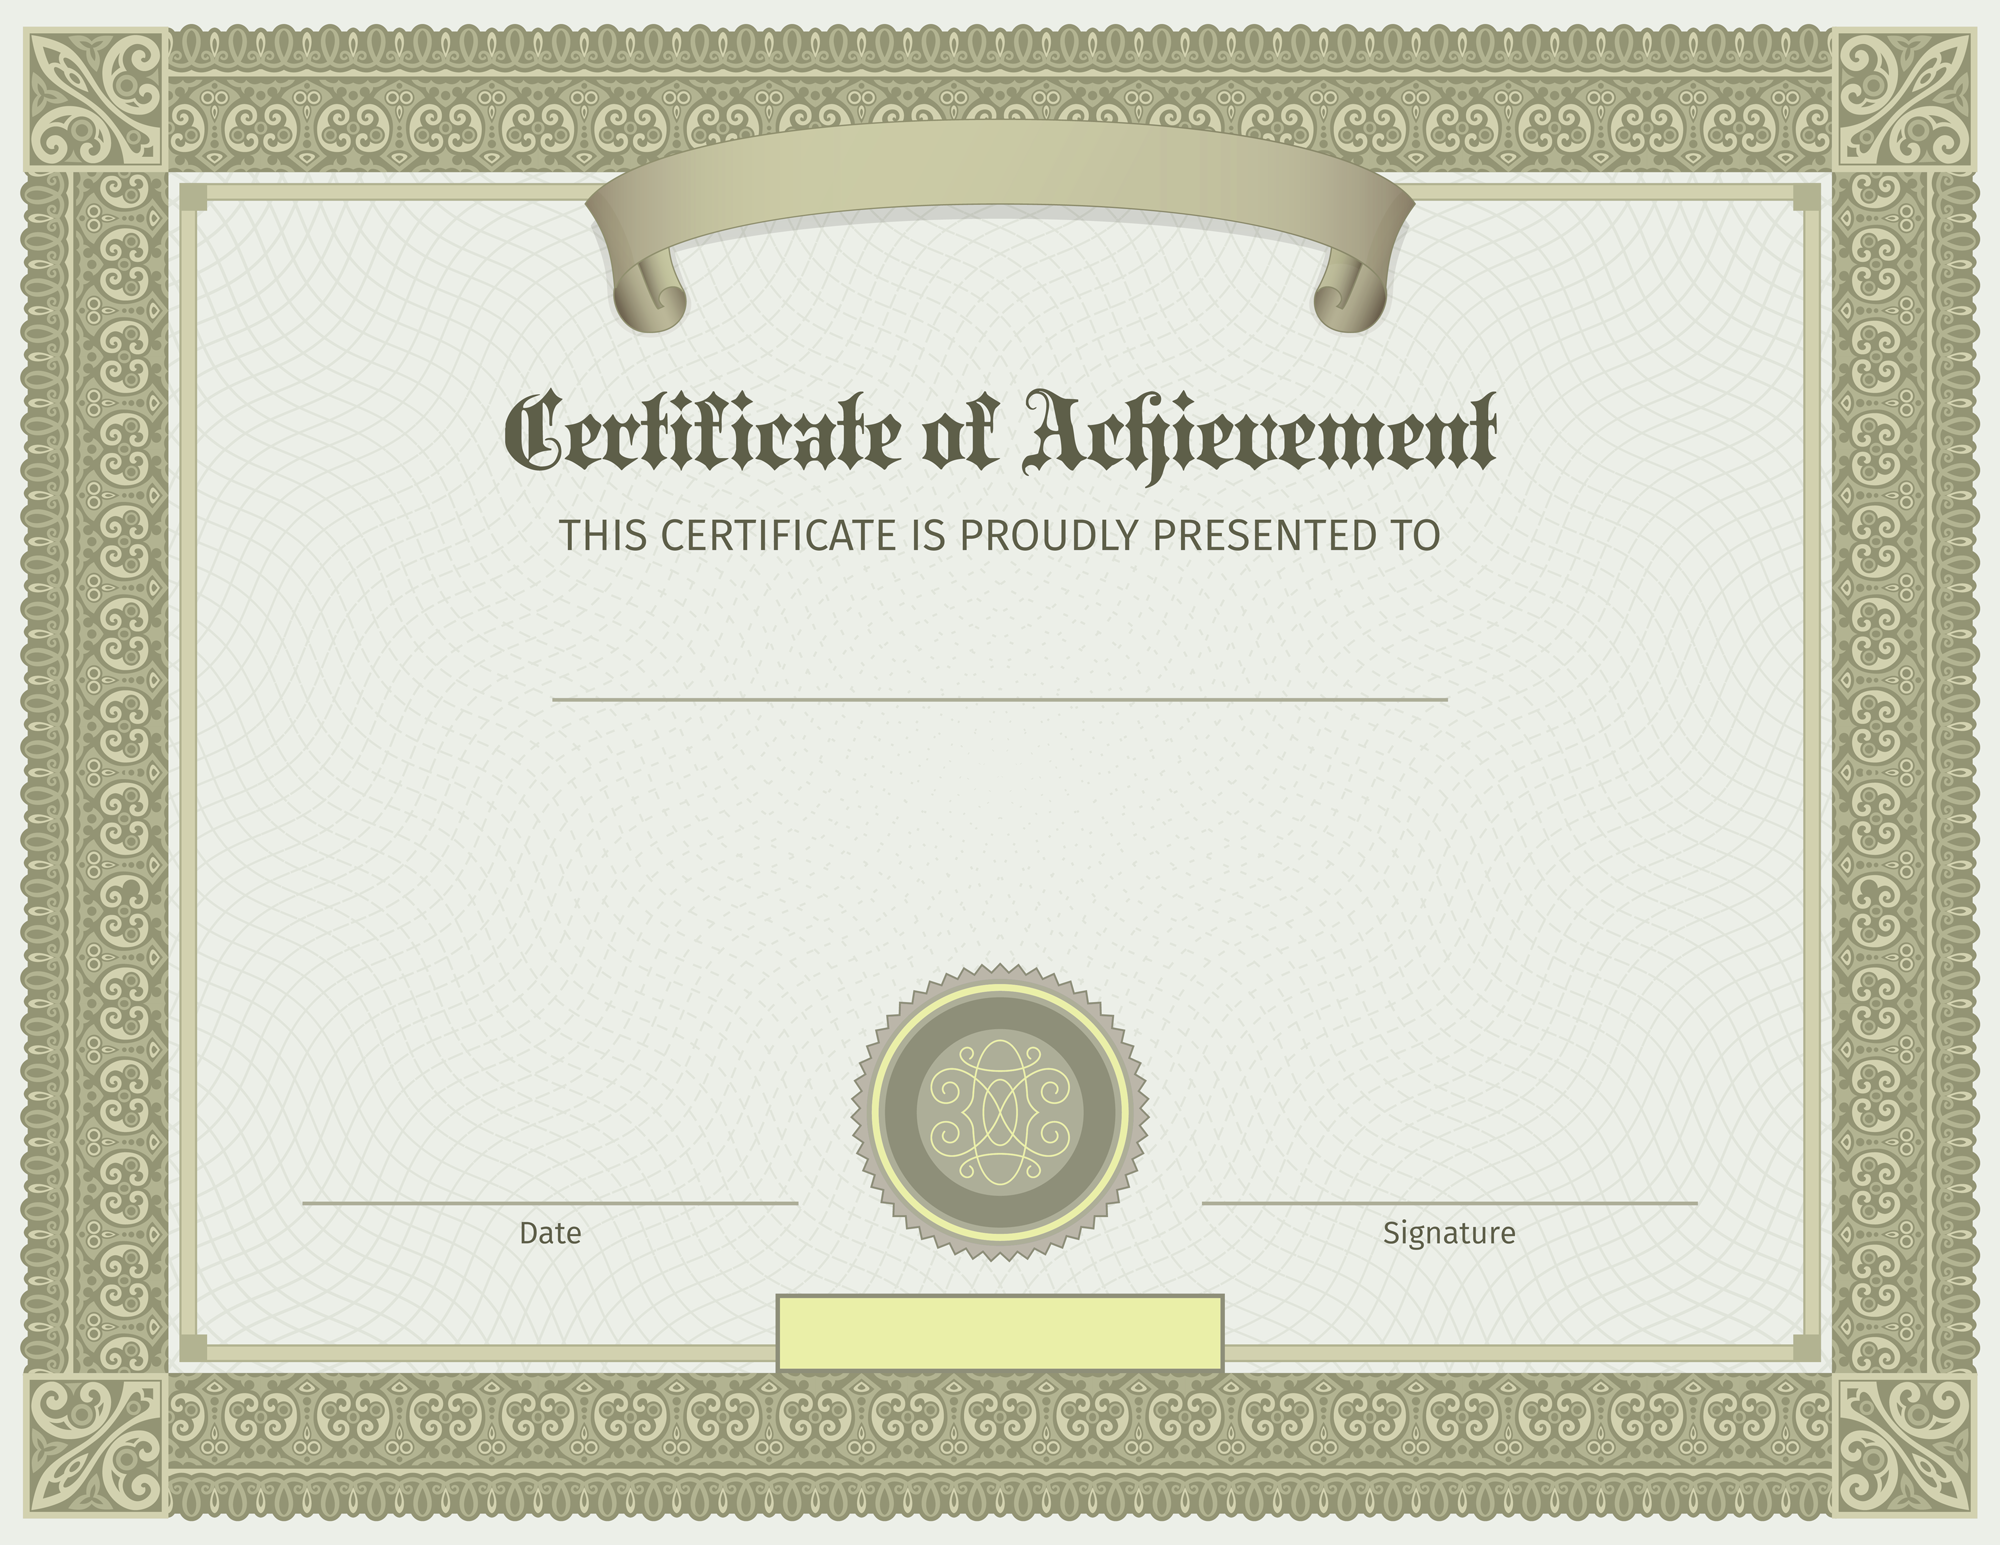 Certificate Template Png - Pluspng, Transparent background PNG HD thumbnail